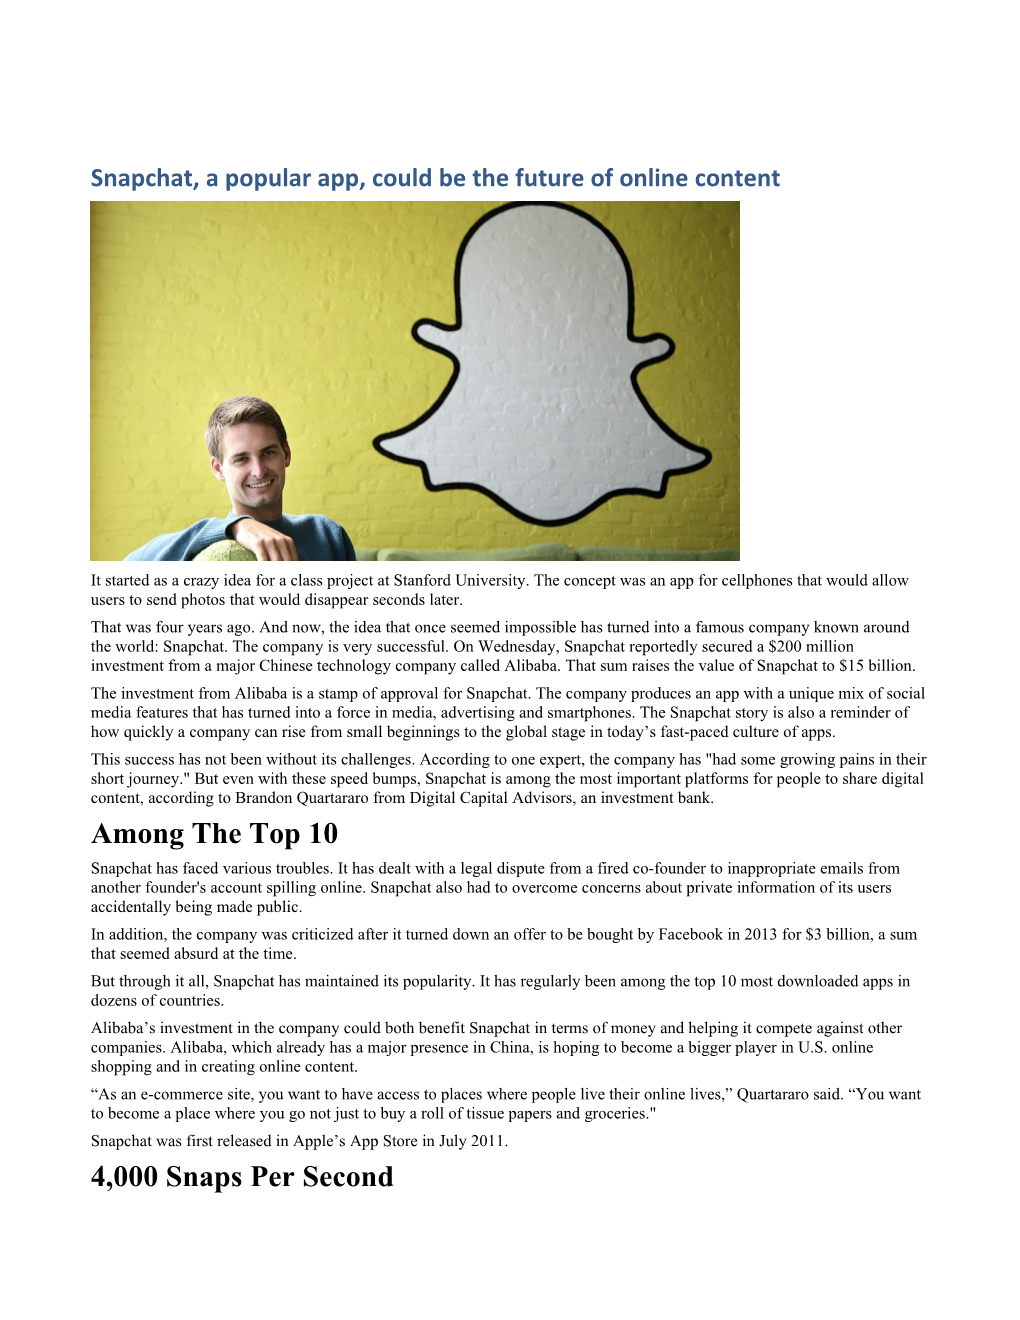 Snapchat, a Popular App, Could Be the Future of Online Content